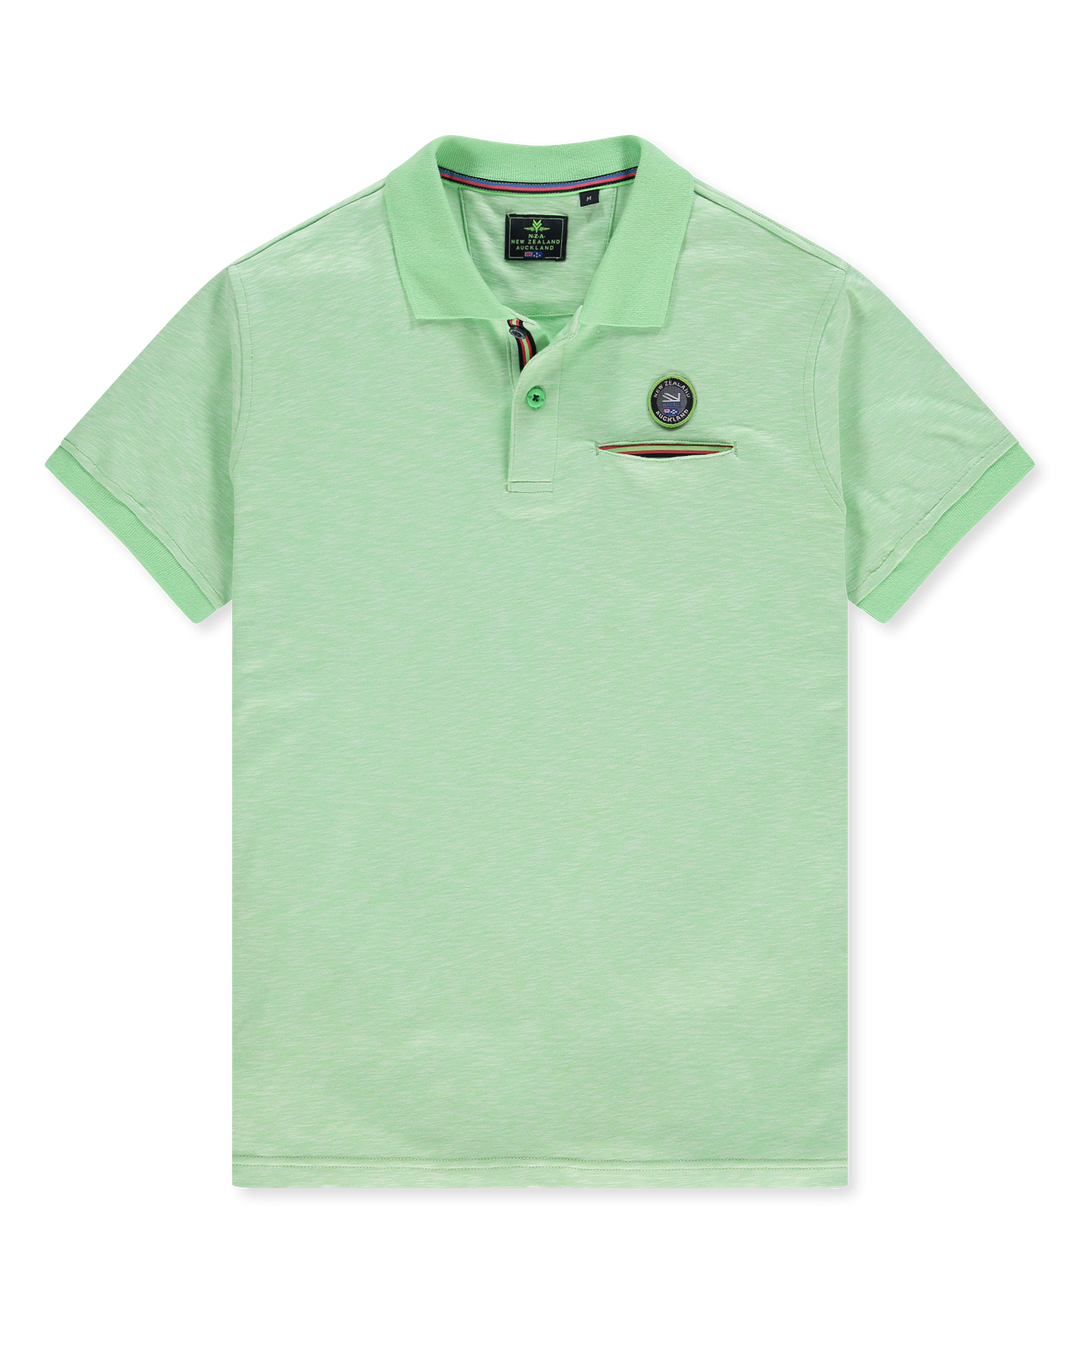 NZA - Polo - Coopers - 1715 Wasabi Fluor